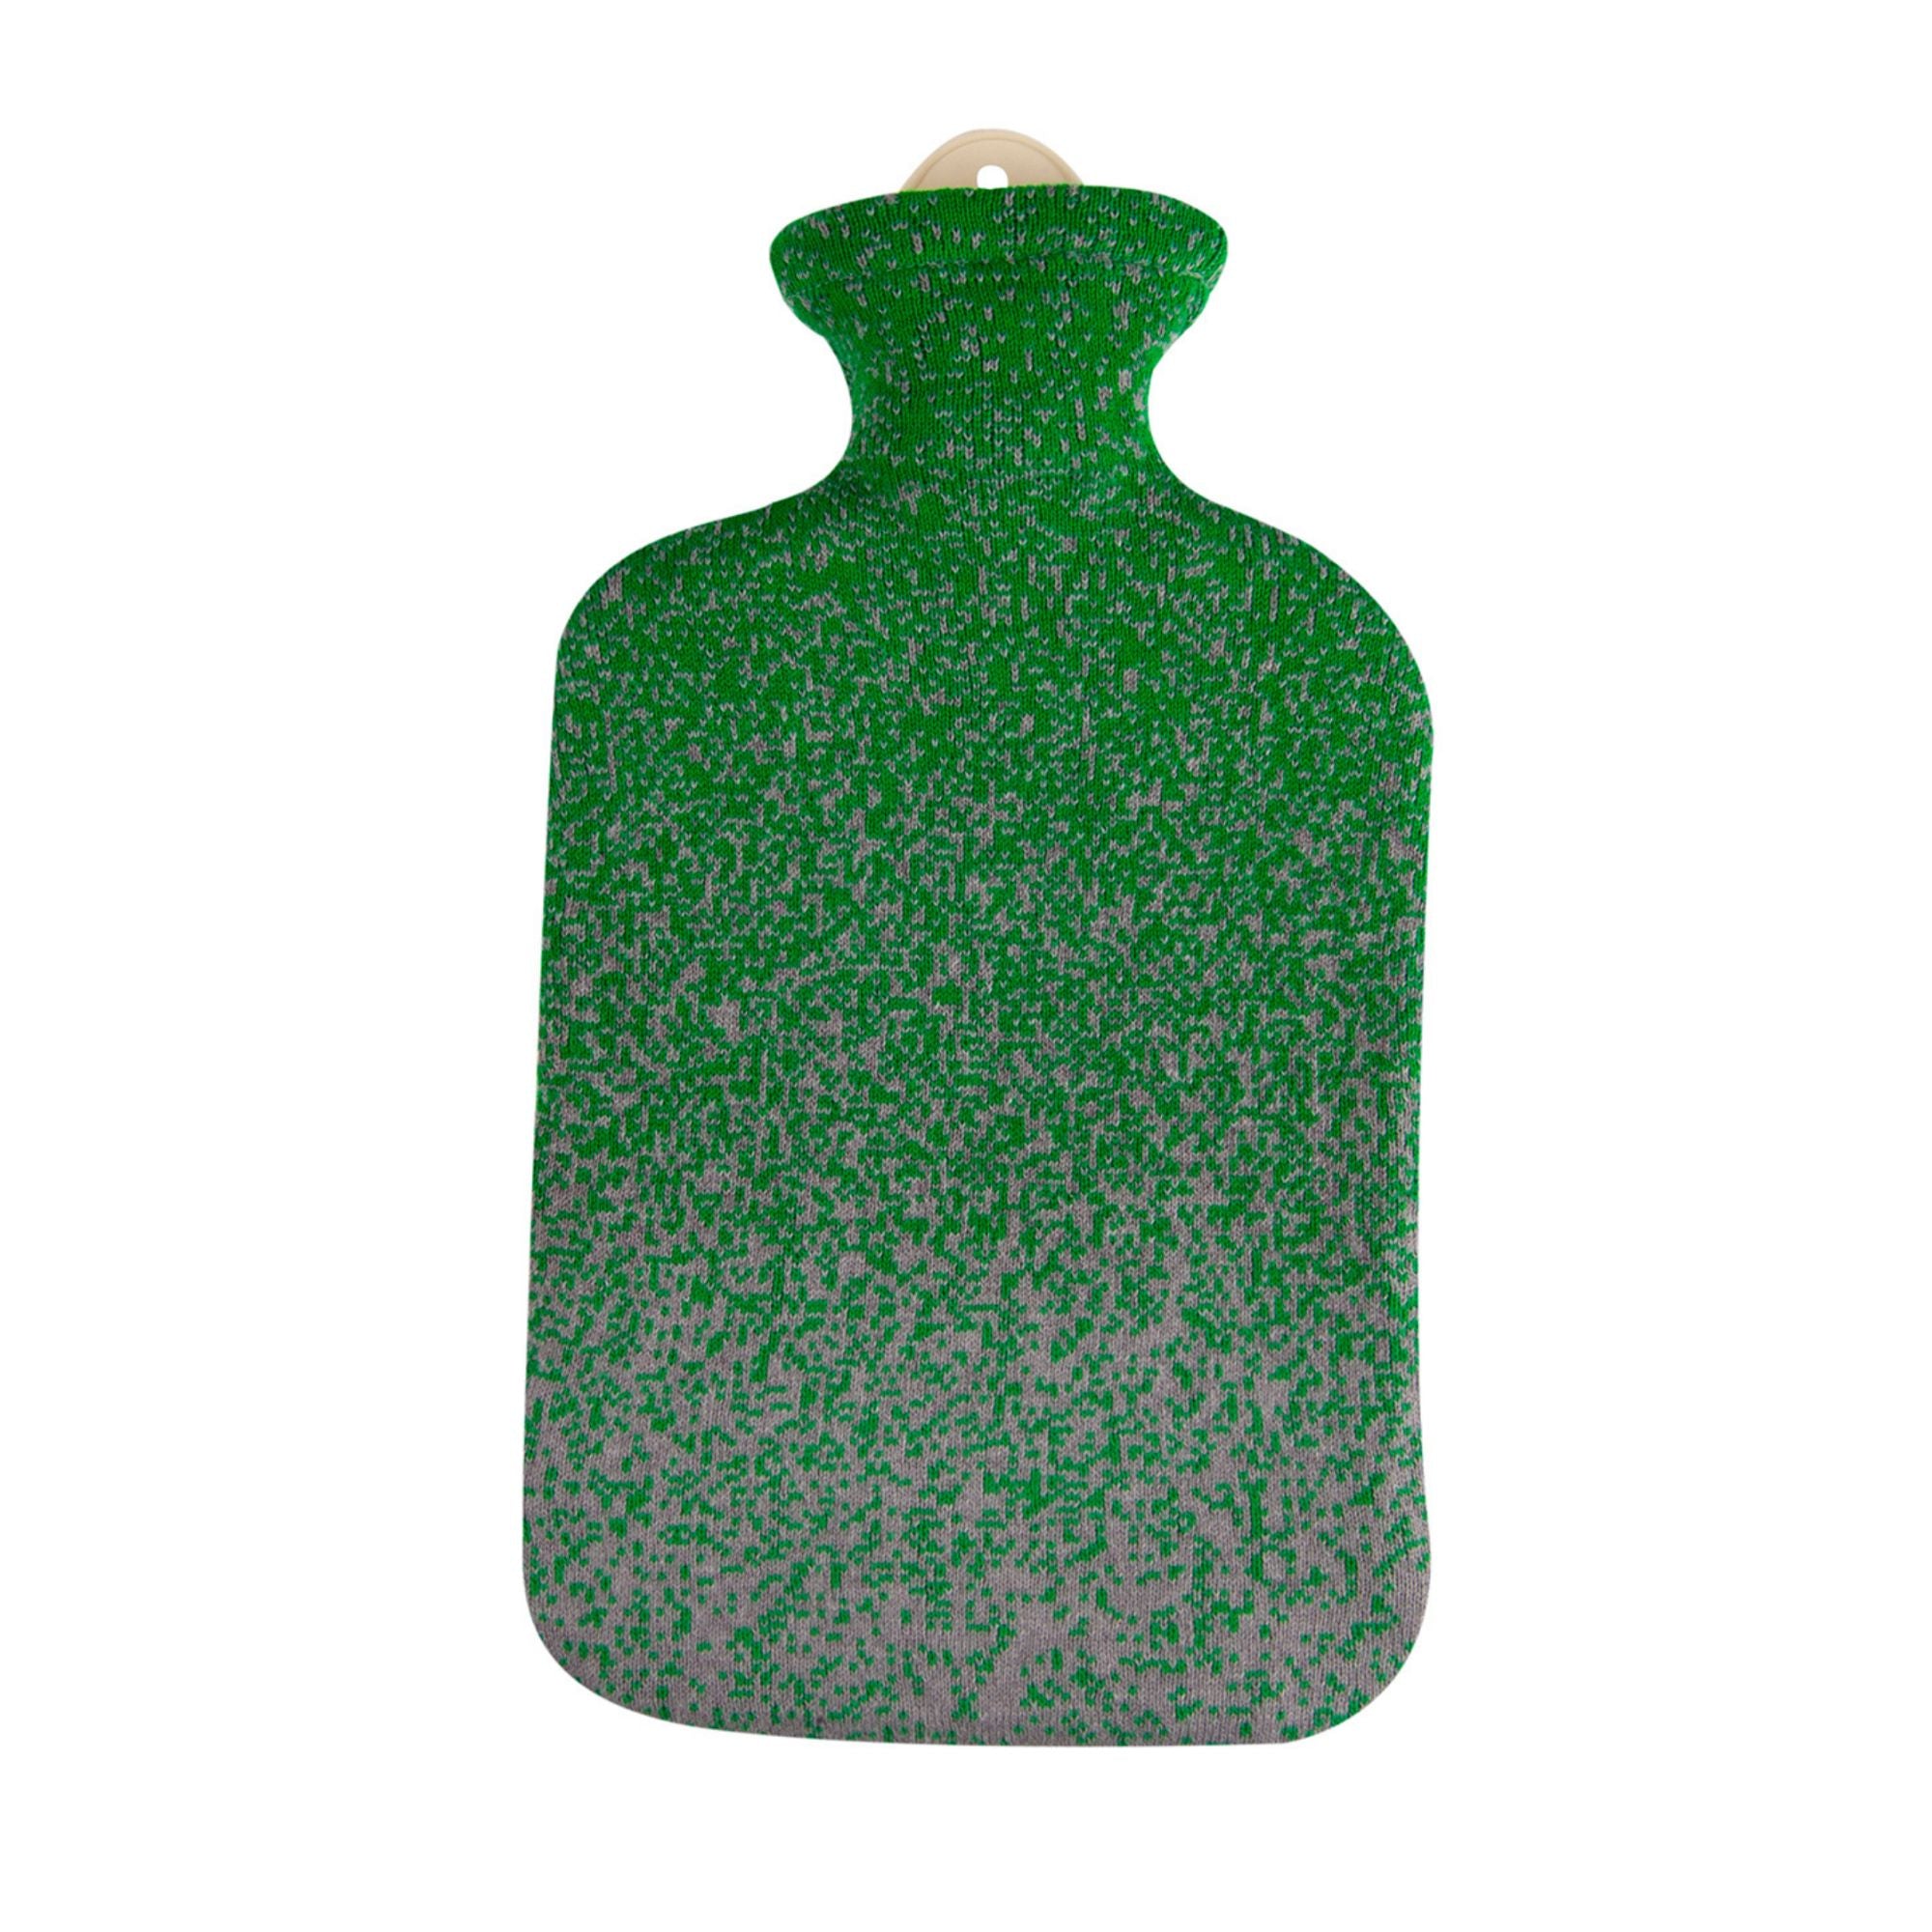 2 Litre Sanger Hot Water Bottle with Knitted Pixel Green Cotton Cover